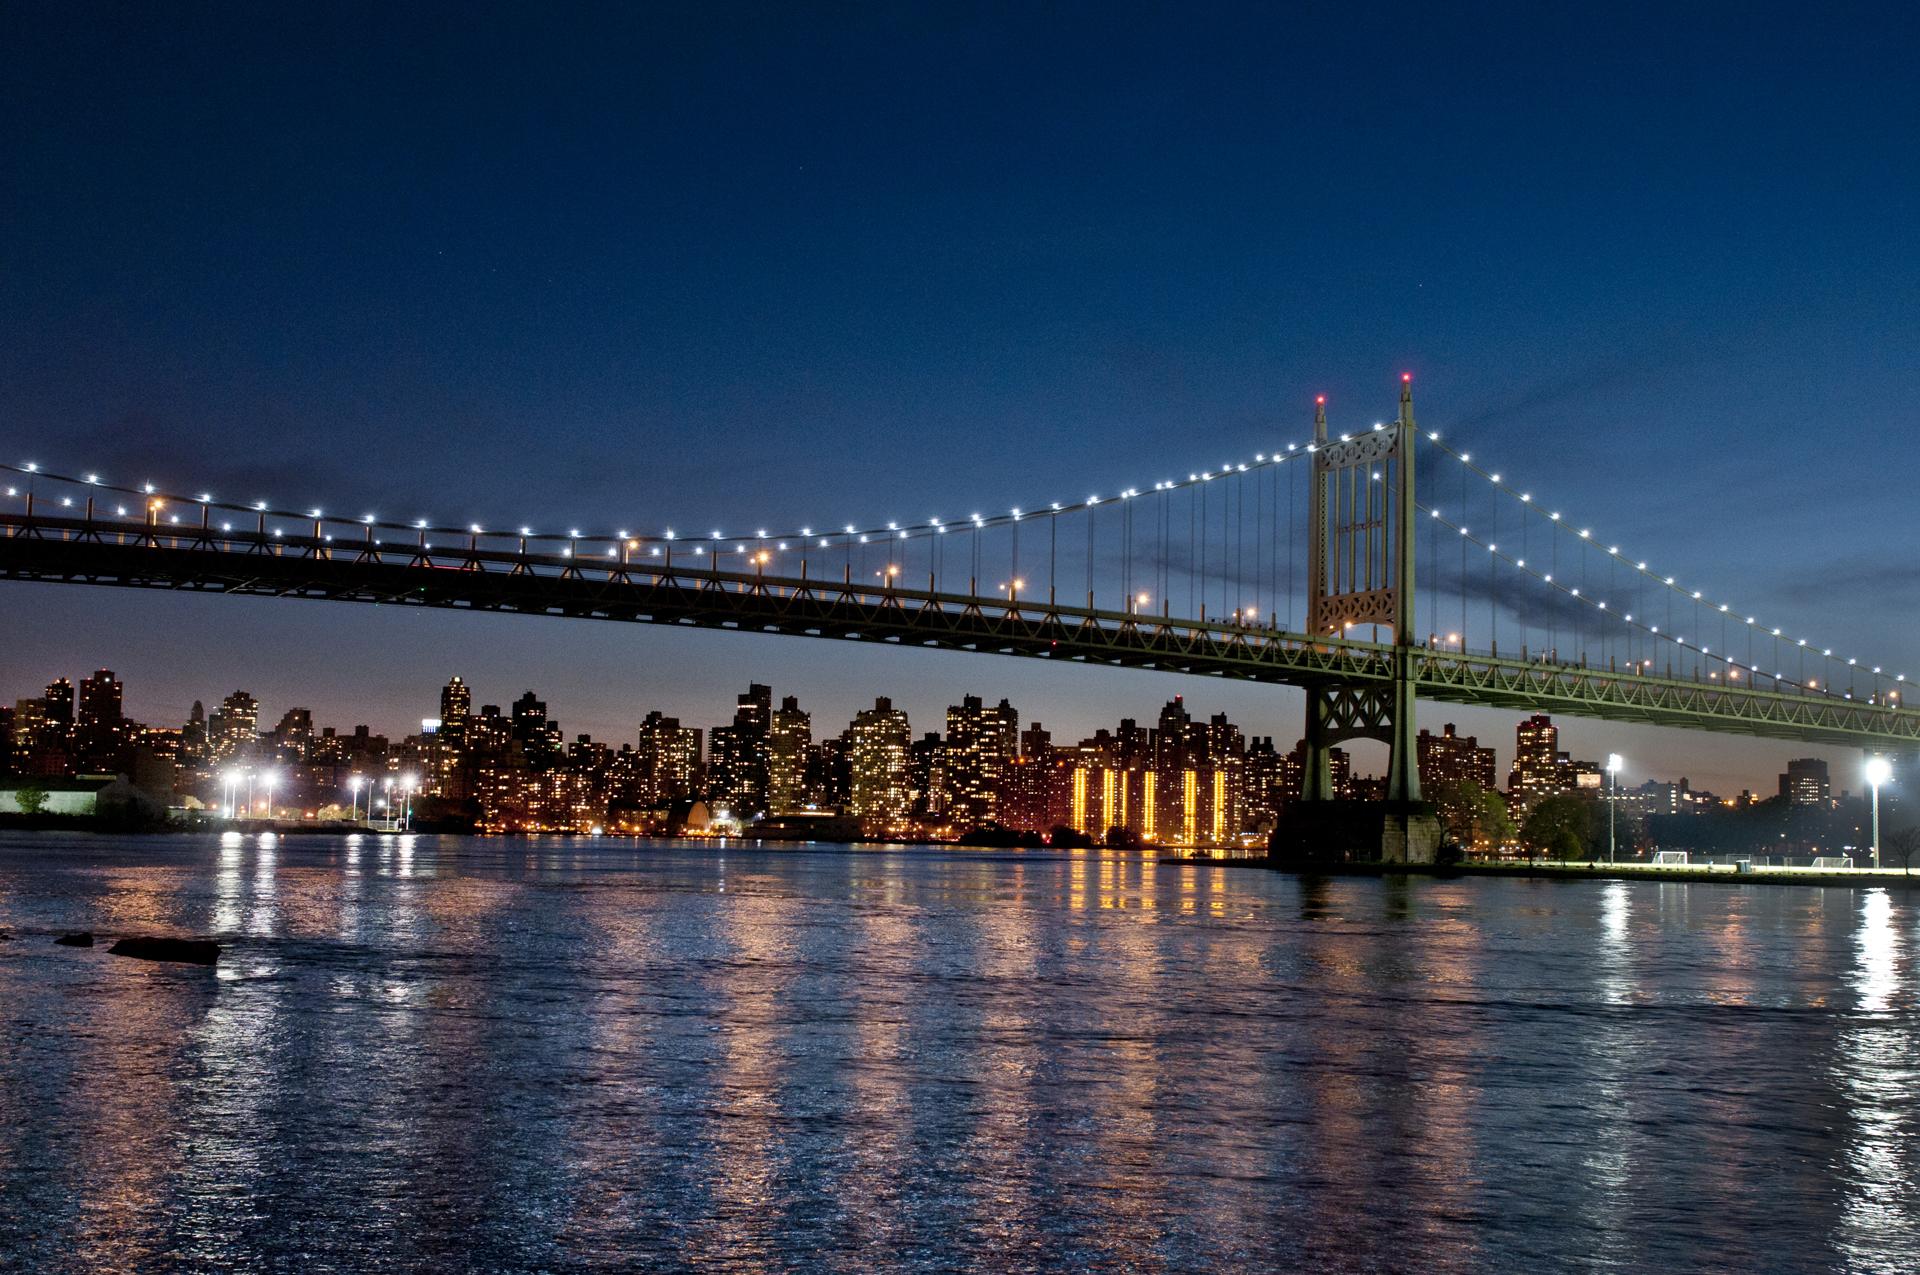 A bridge illuminated at twilight stretches over a view of the lit-up cityscape.